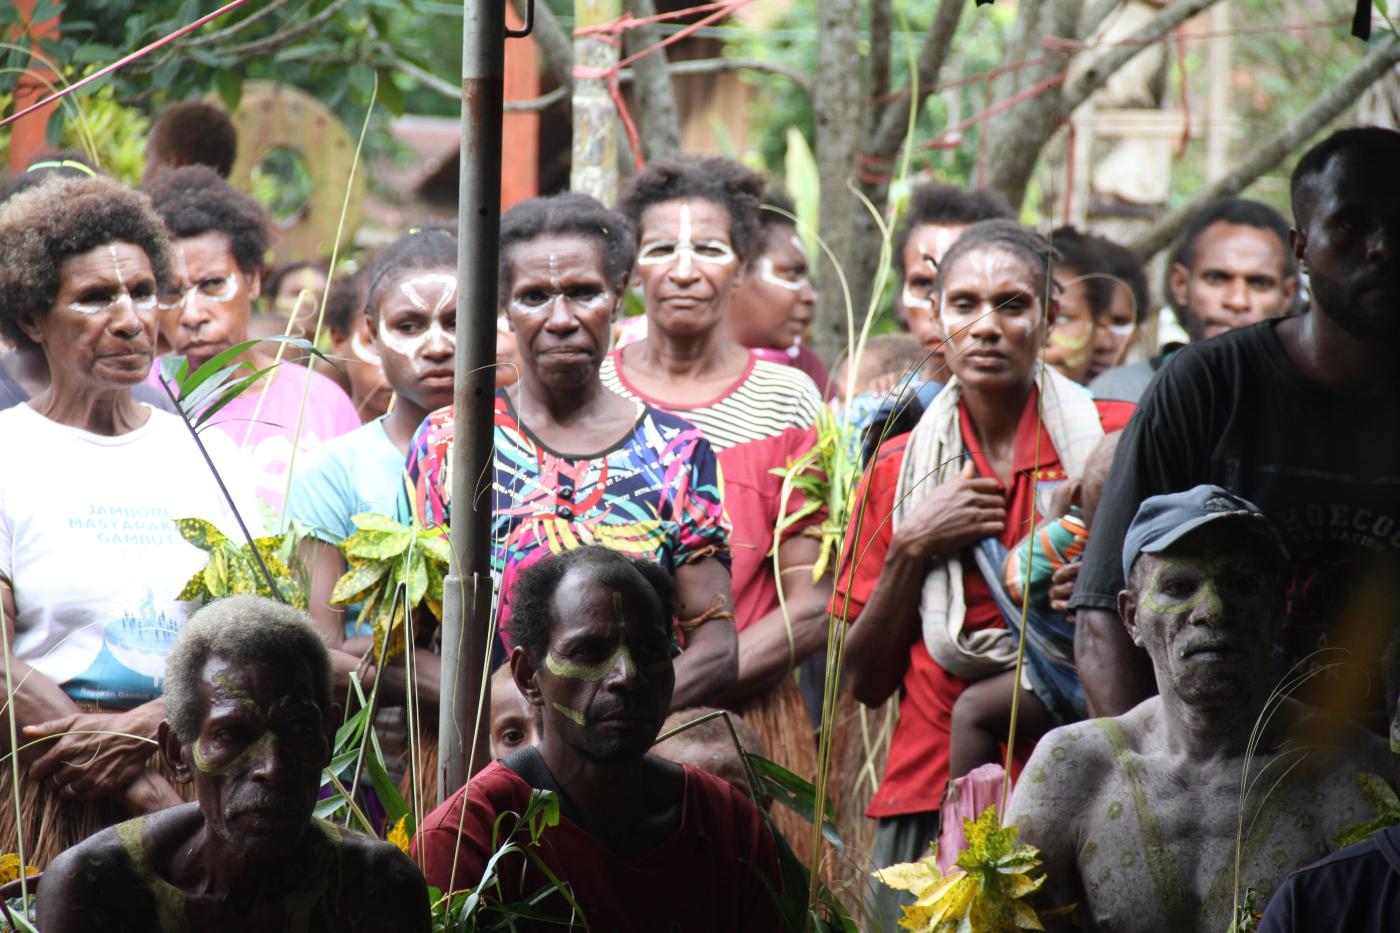 Villagers welcome the WCC delegation in Kaliki village near Merauke in Papua Province. Photo: Jimmy Sormin/WCC